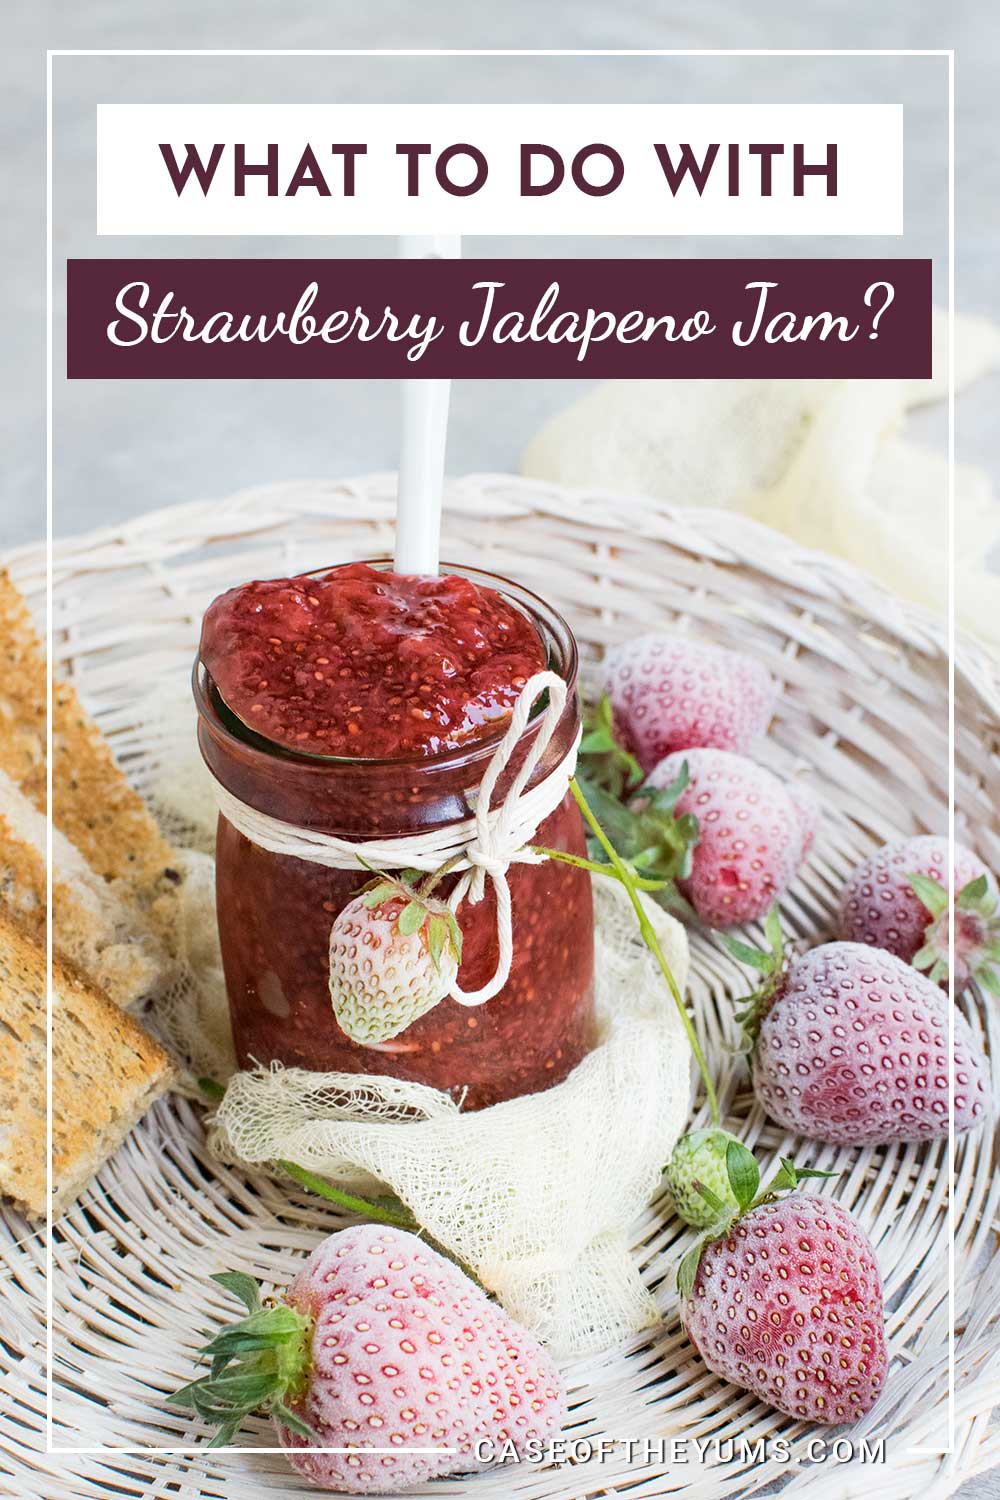 Strawberry Jalapeno Jam in a jar in a round basket - What to do with them?